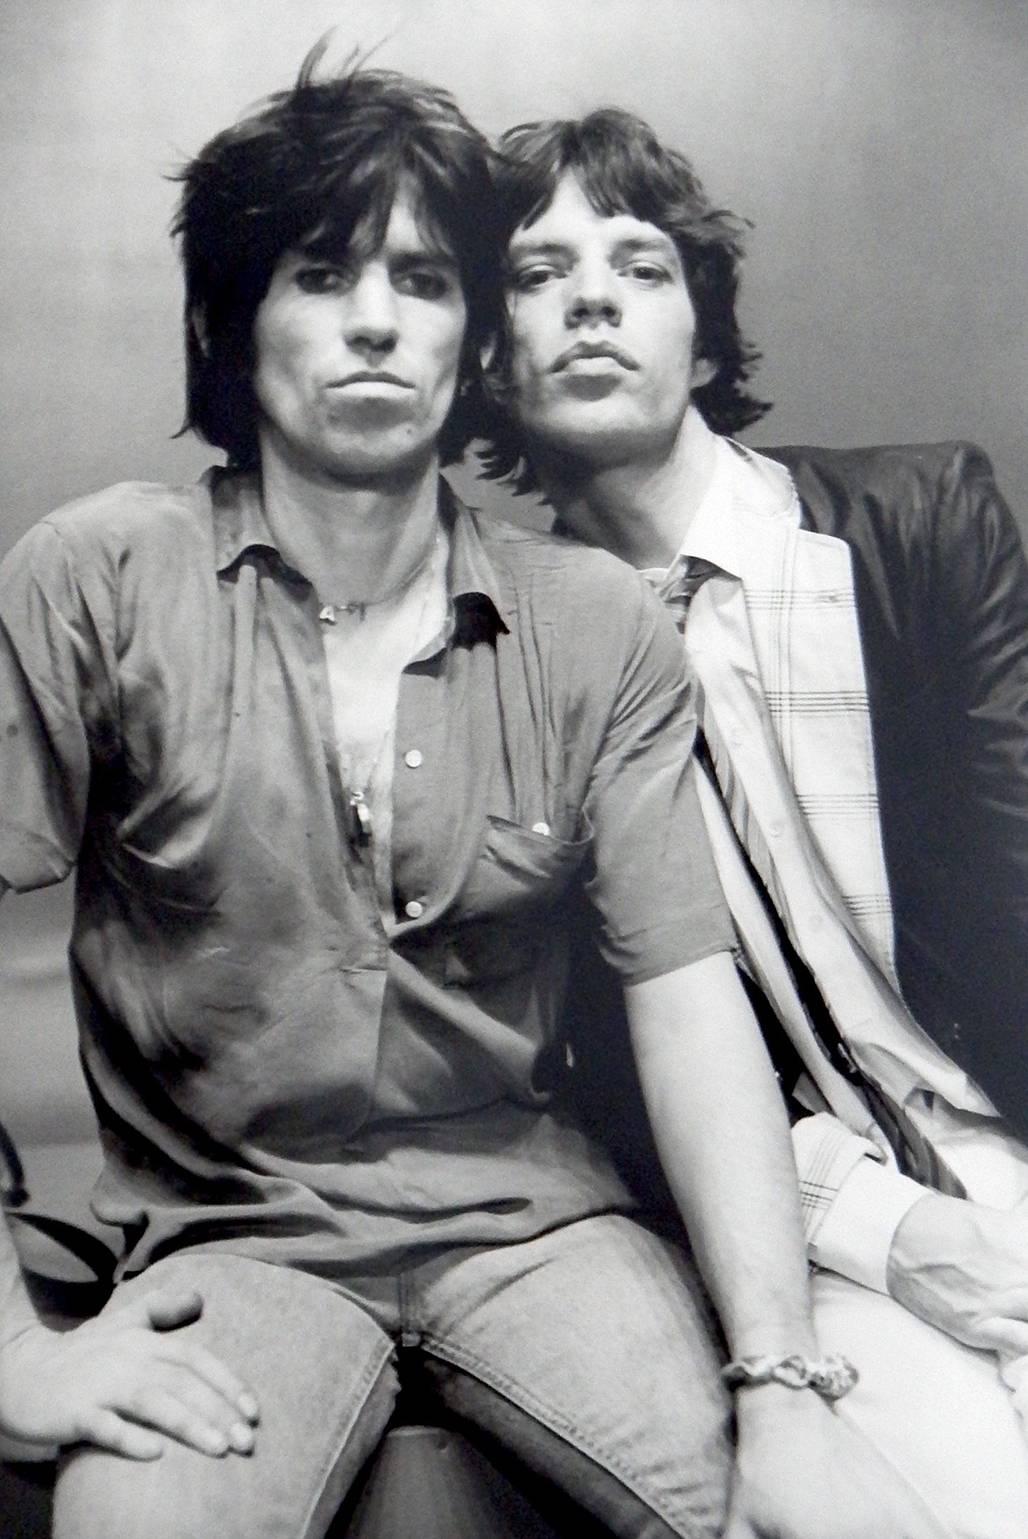 Michael Putland Black and White Photograph - Mick Jagger and Keith Richards